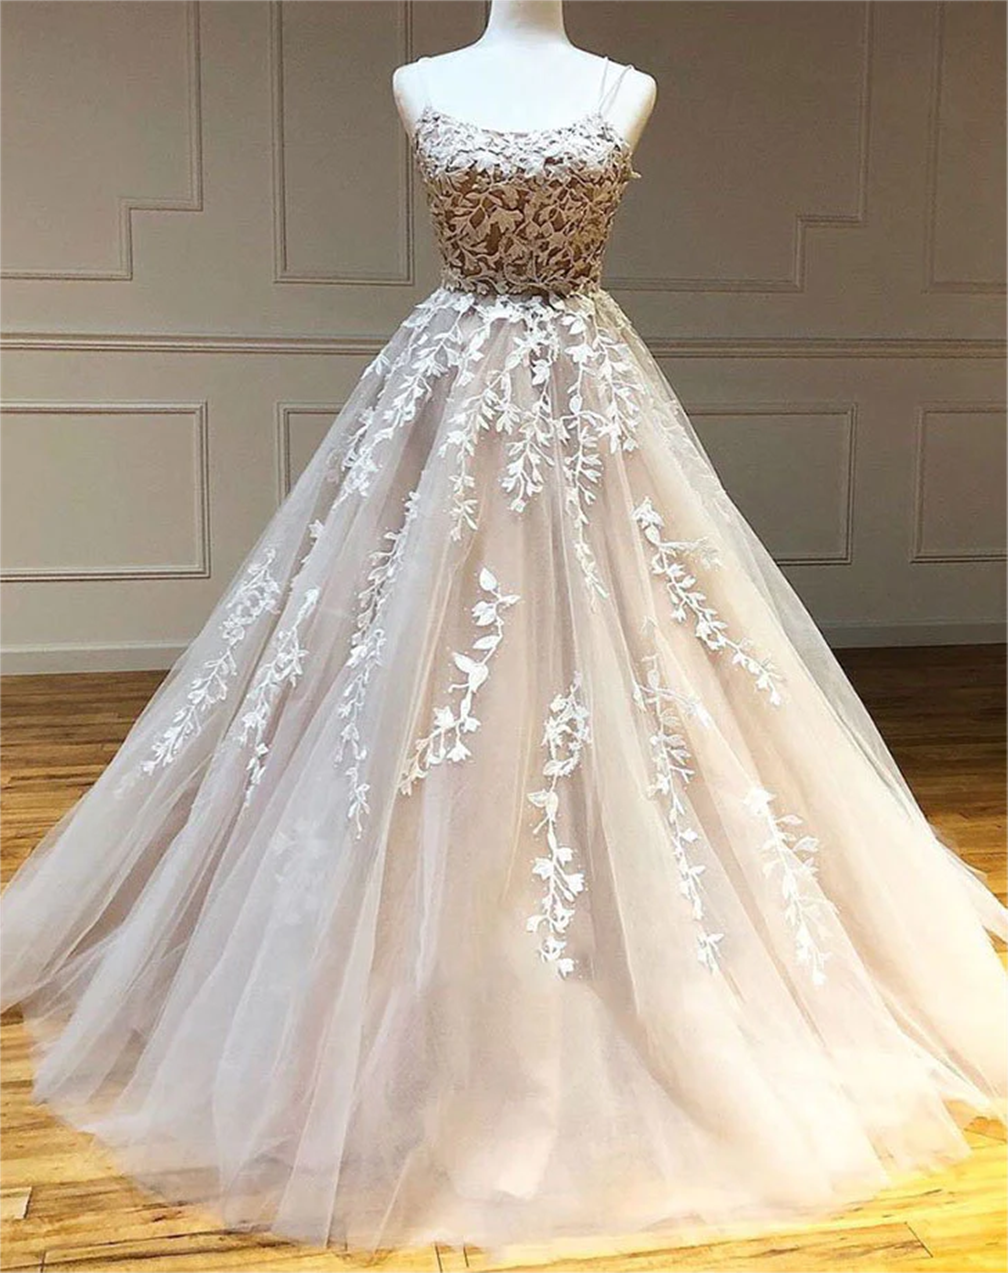 Women A-line Tulle Lace Prom Dresses Long Appliques Evening Party Gowns Sleeveless Formal Dress Yp110